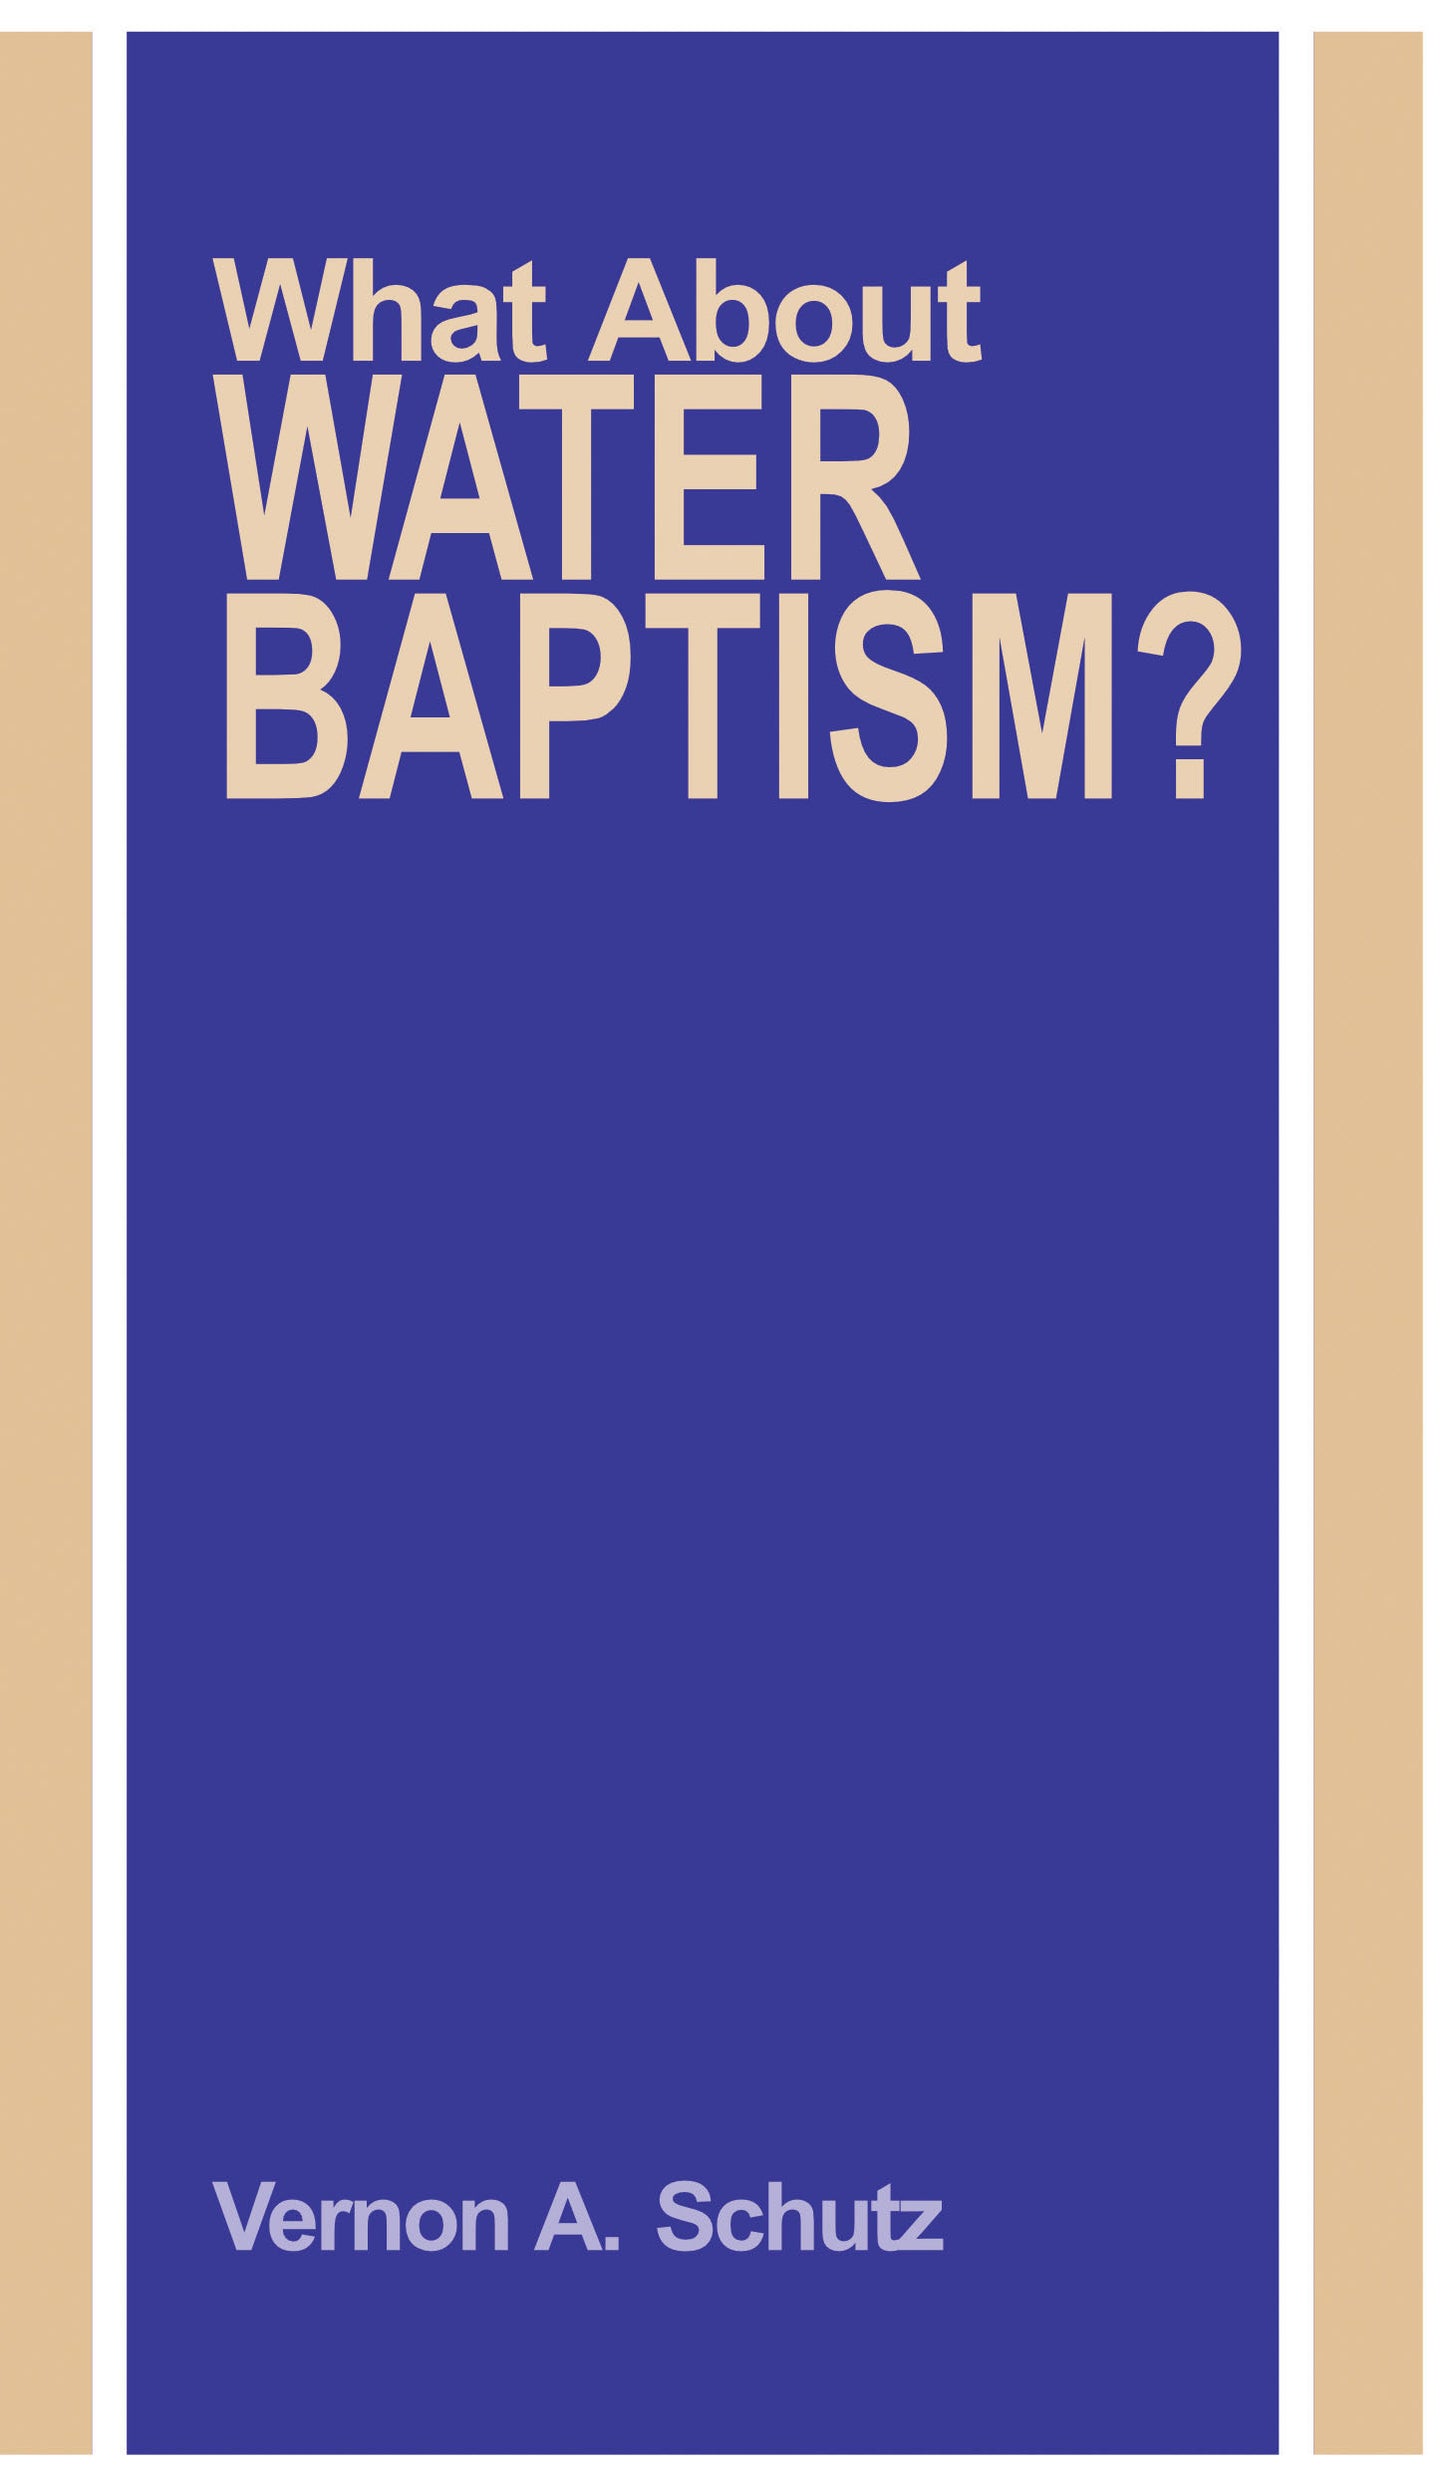 What About Water Baptism?